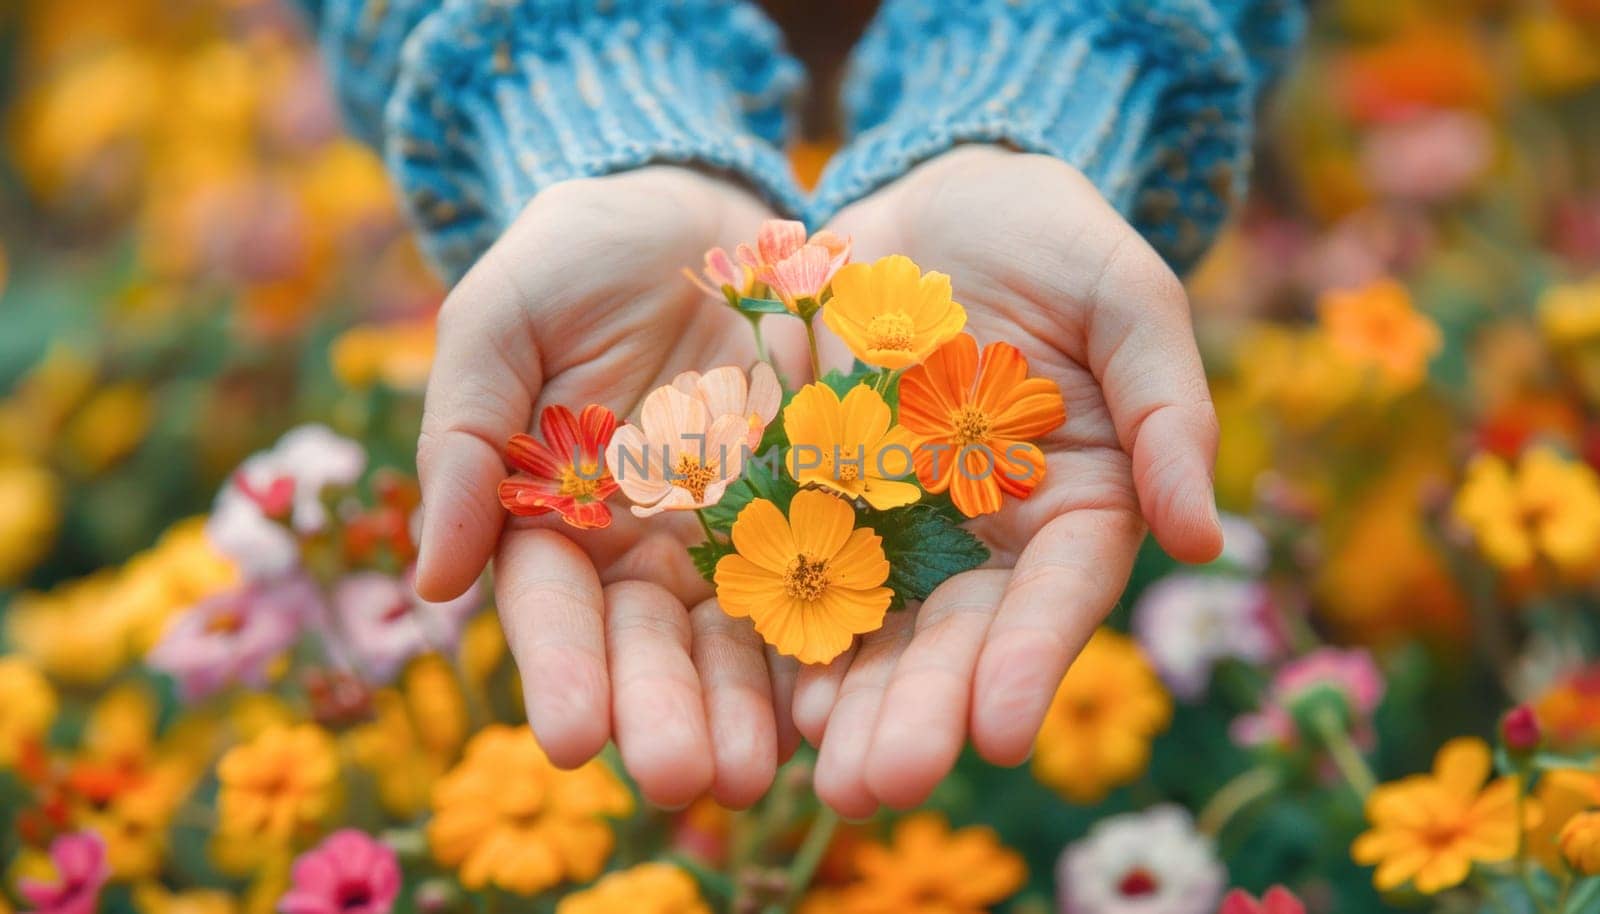 A person is standing in a field of flowers, holding a bunch of flowers in their hands, surrounded by nature and beauty